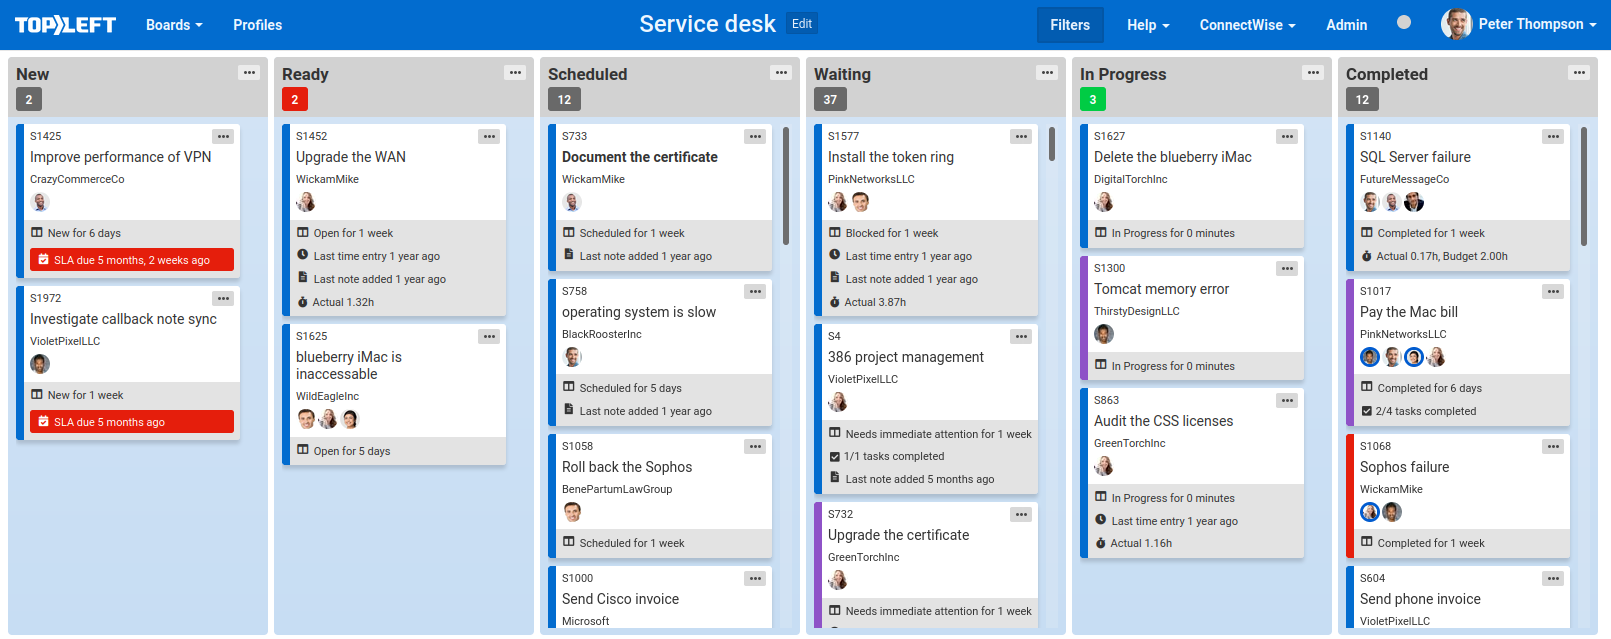 Kanban board showing all an engineer's work in one place